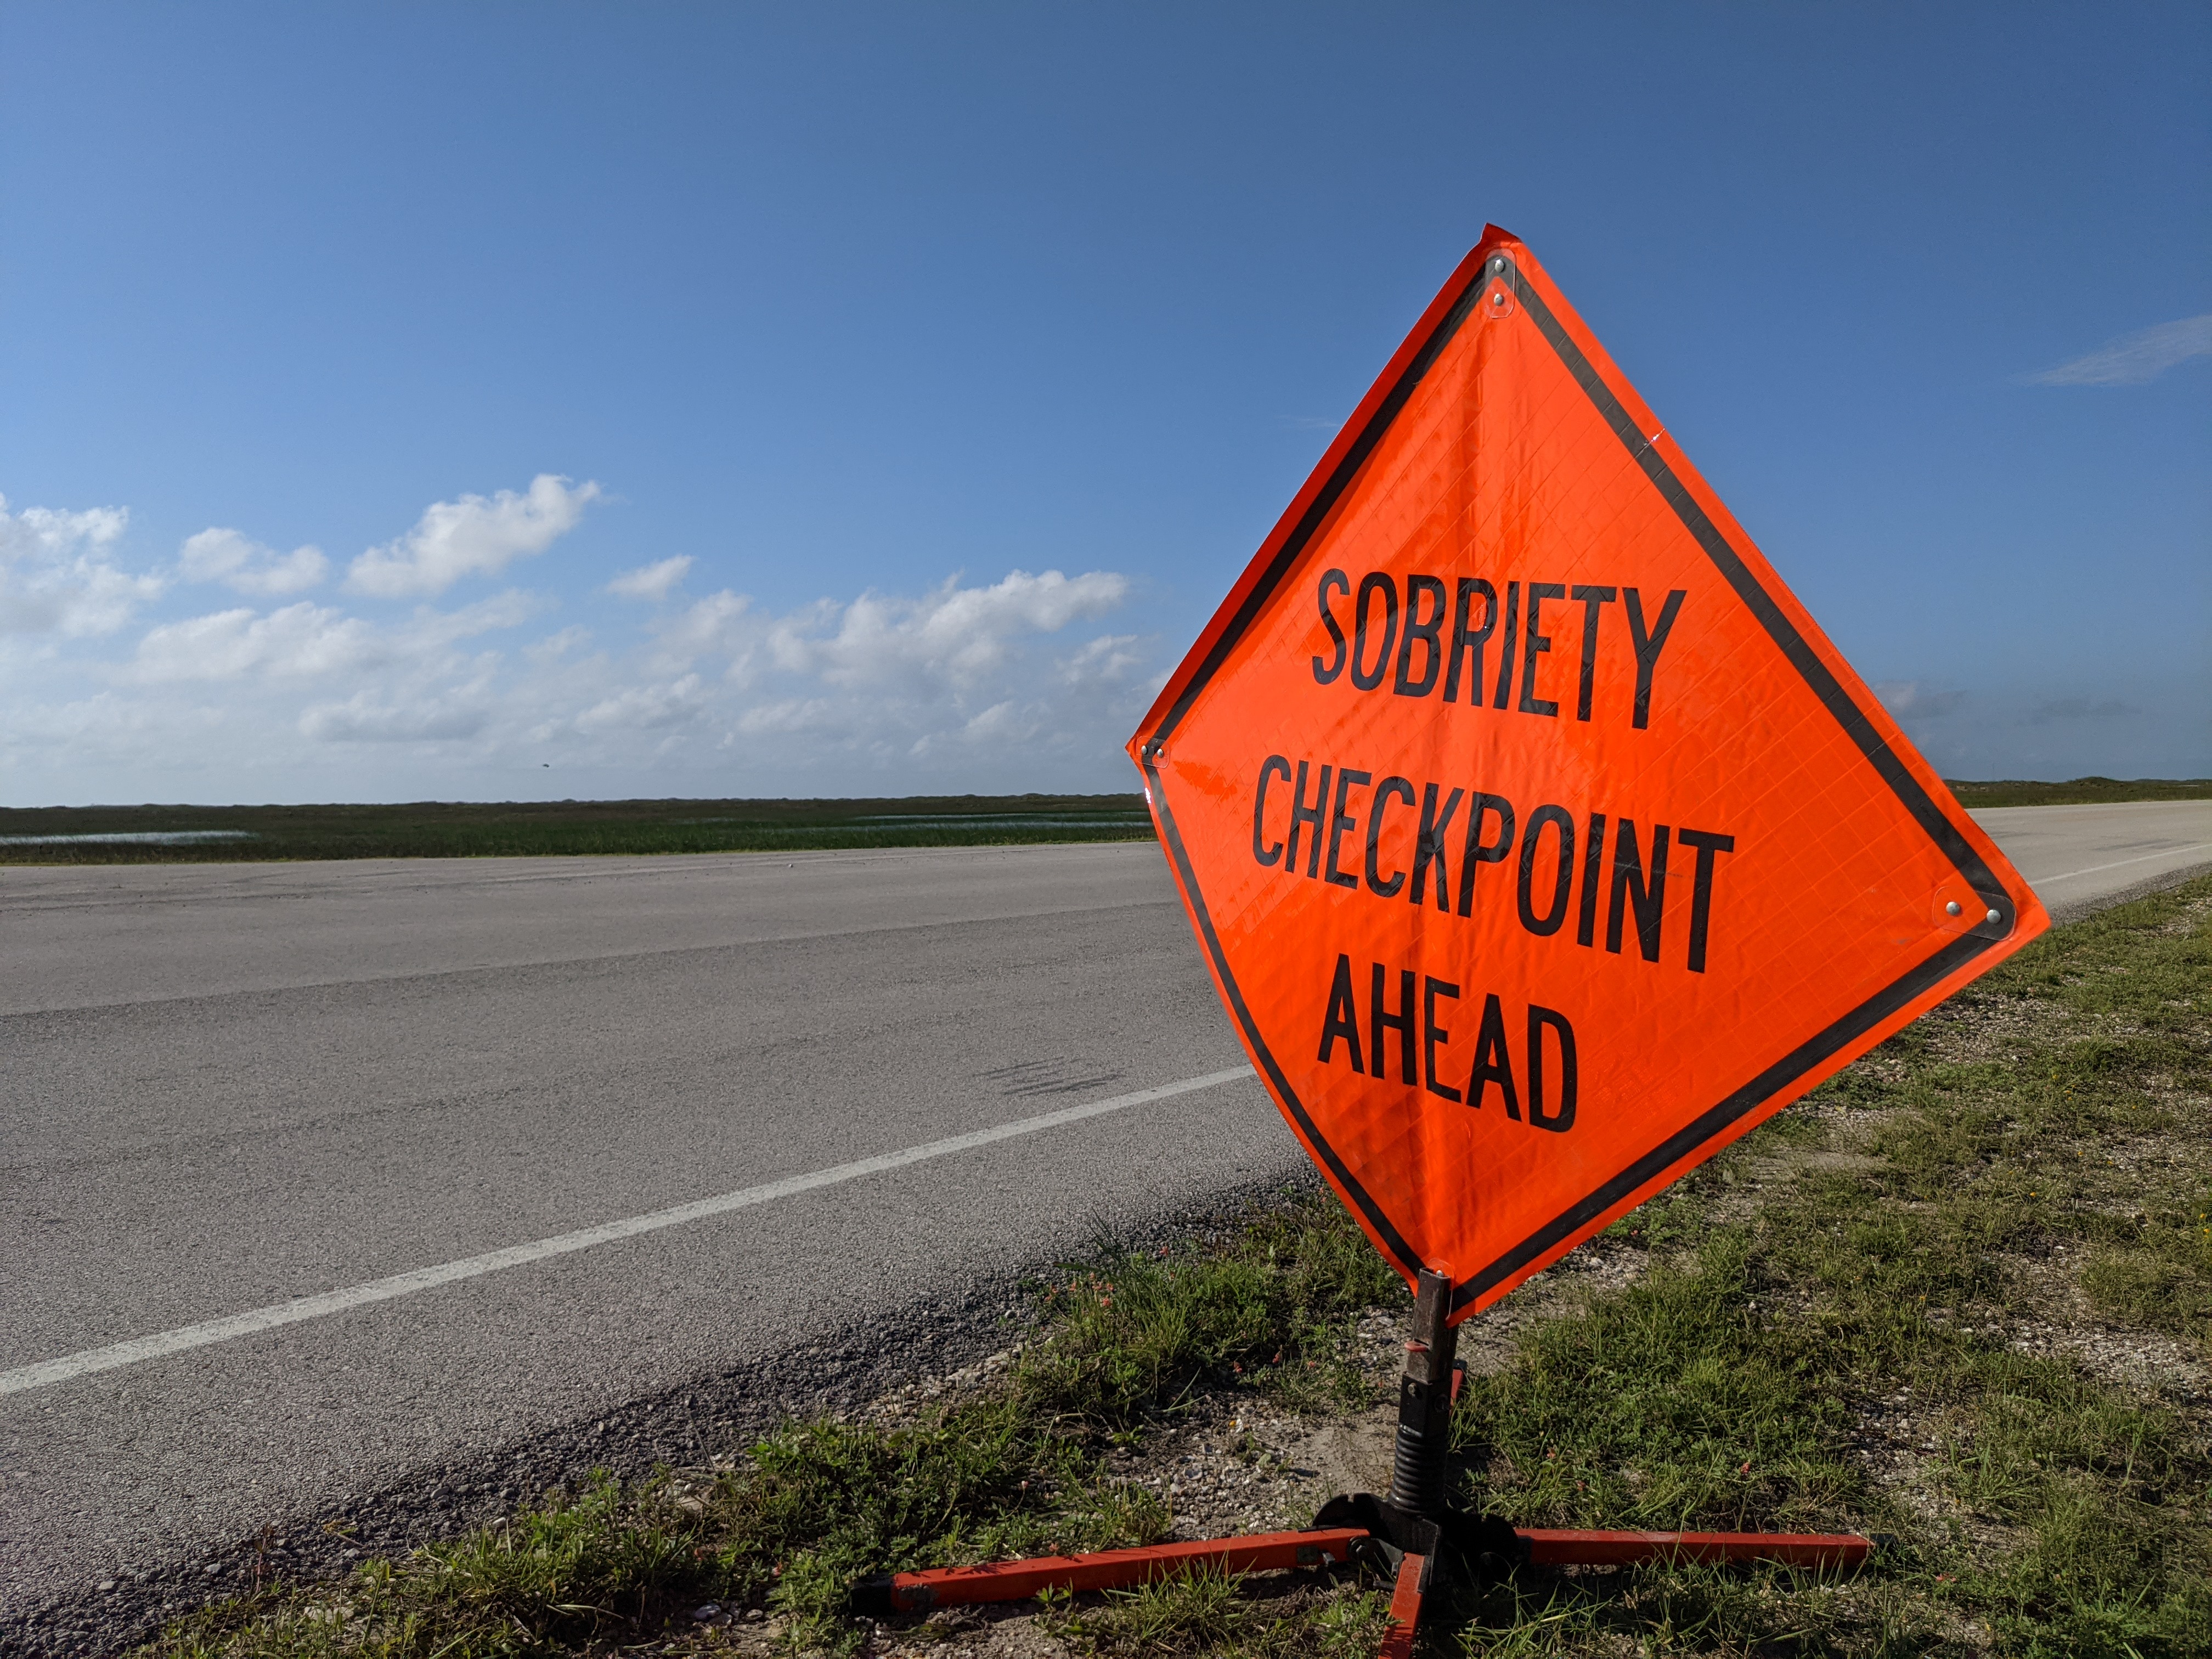 checkpoint sign